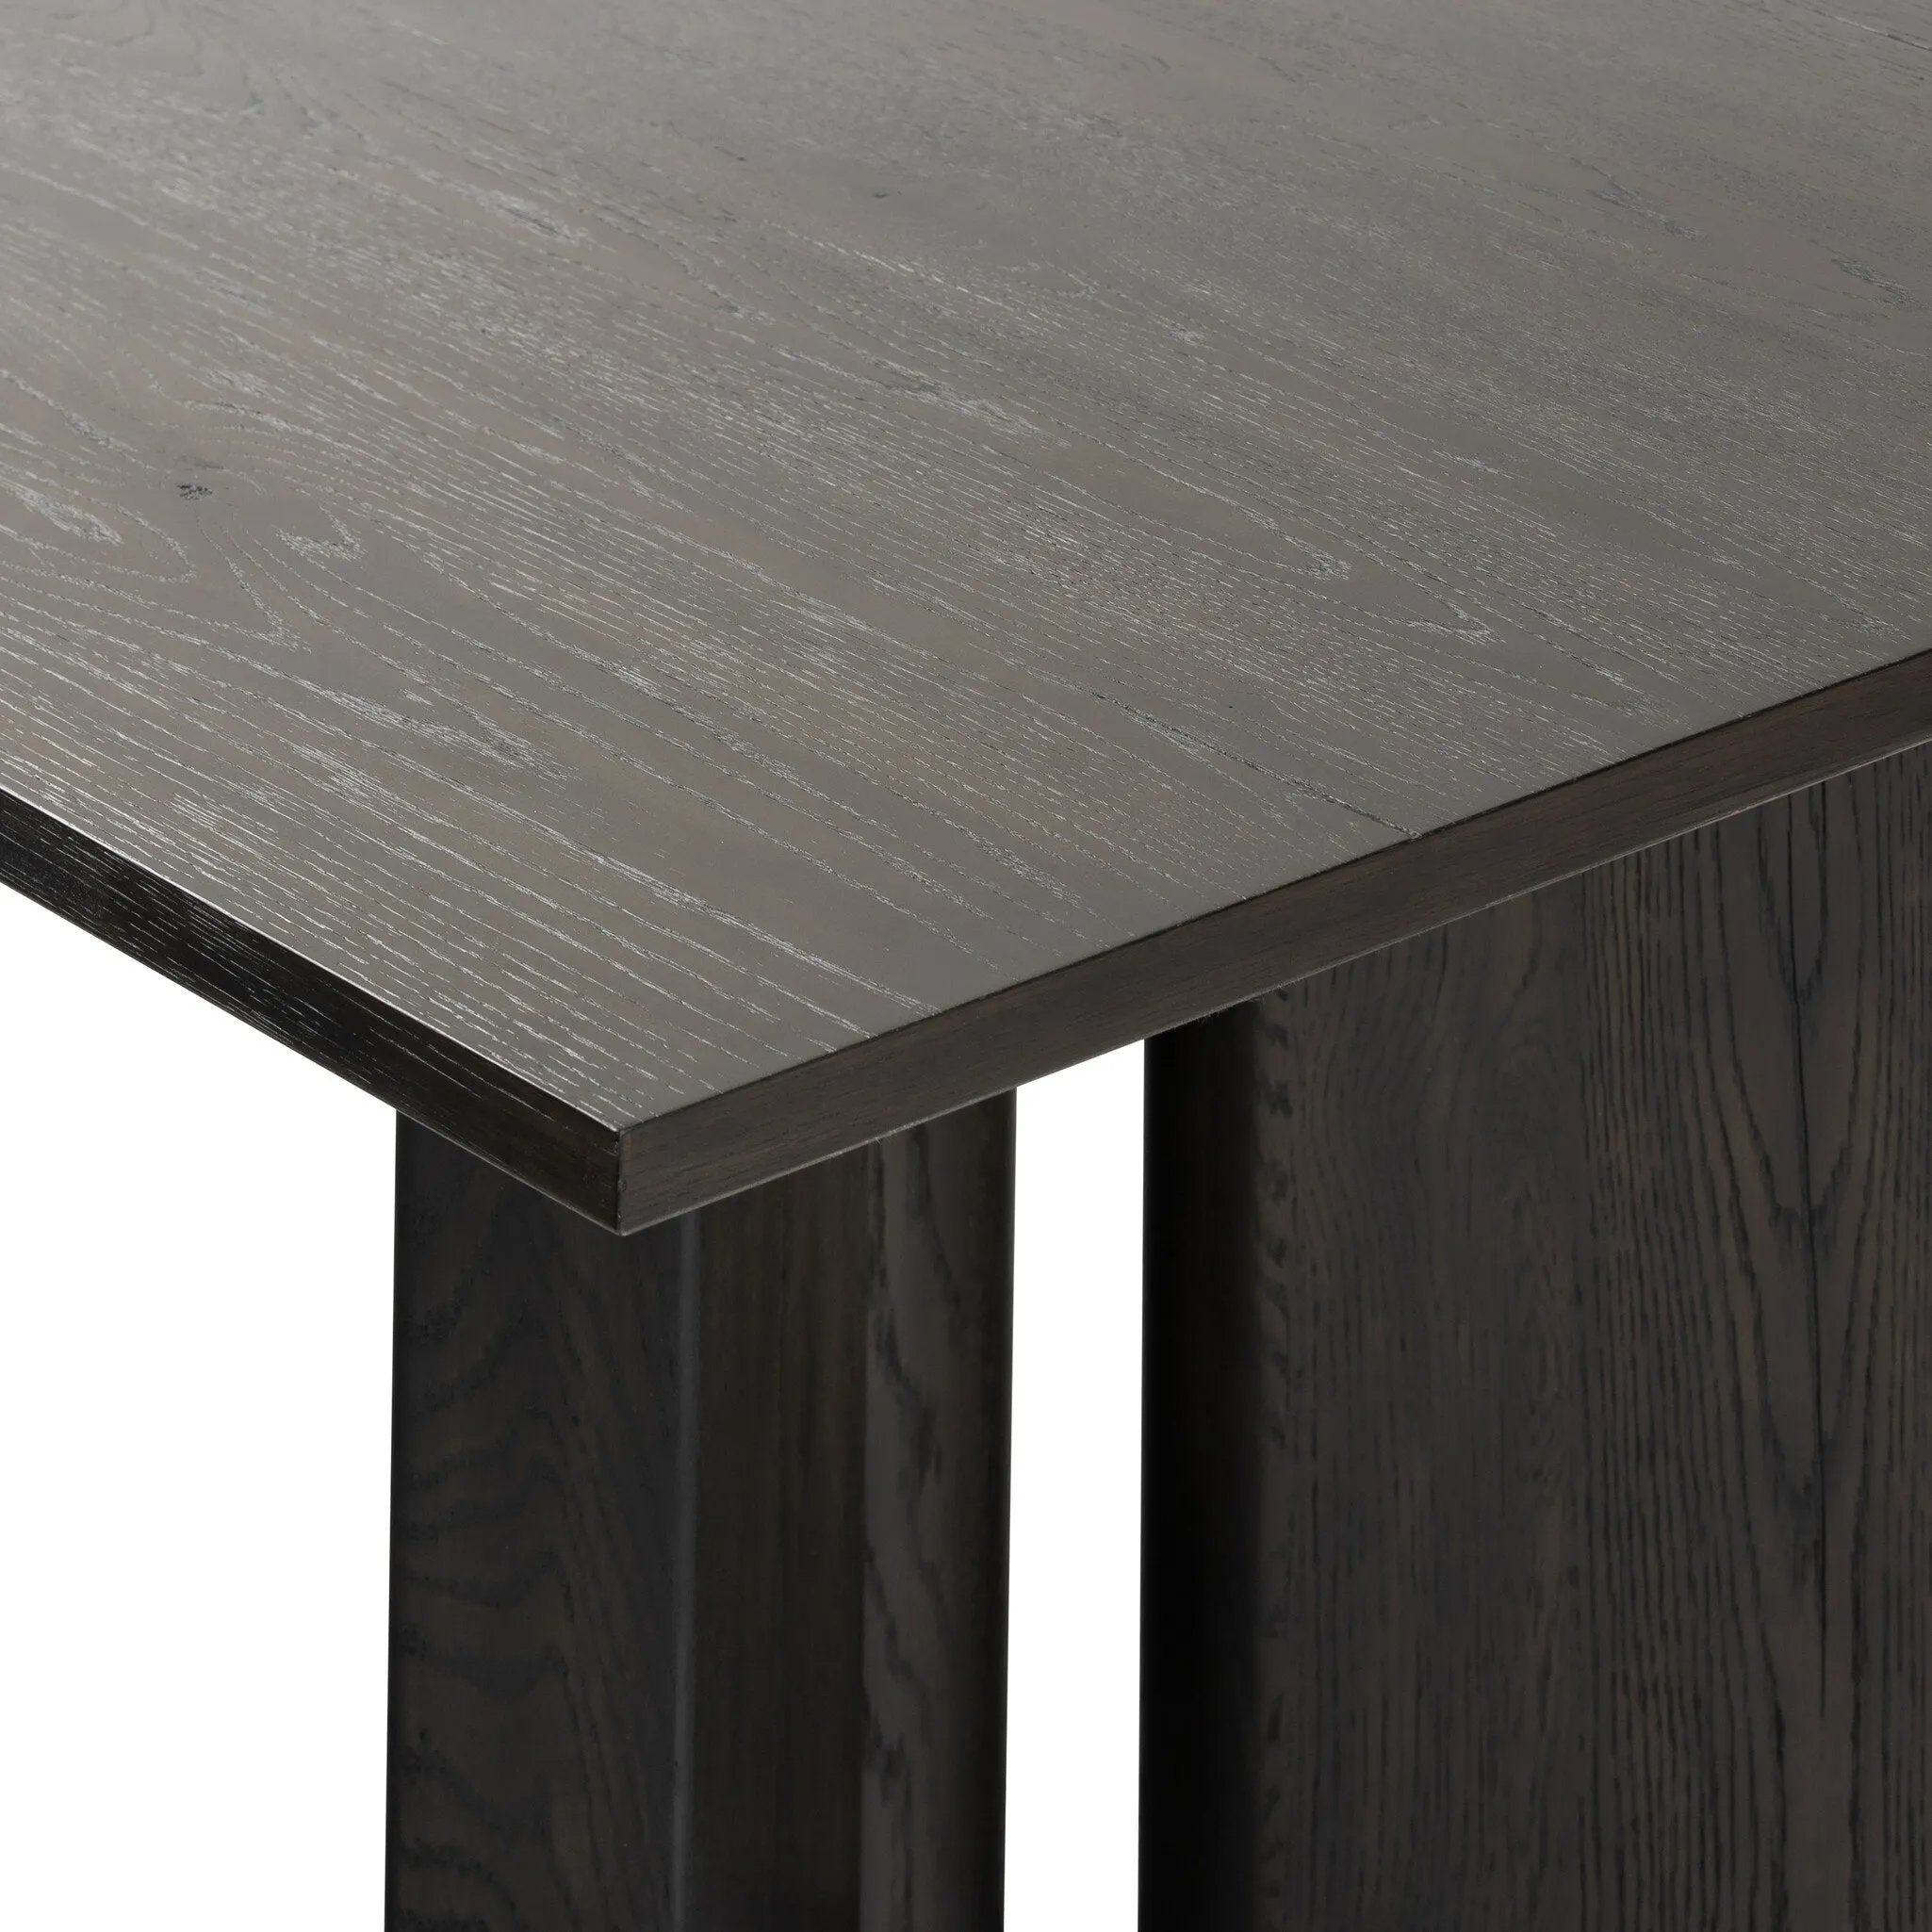 A smoked black finish brings character to this substantially sized dining table. Angled panel legs separated by a round cylinder craft a geometric look.Collection: Haide Amethyst Home provides interior design, new home construction design consulting, vintage area rugs, and lighting in the Newport Beach metro area.